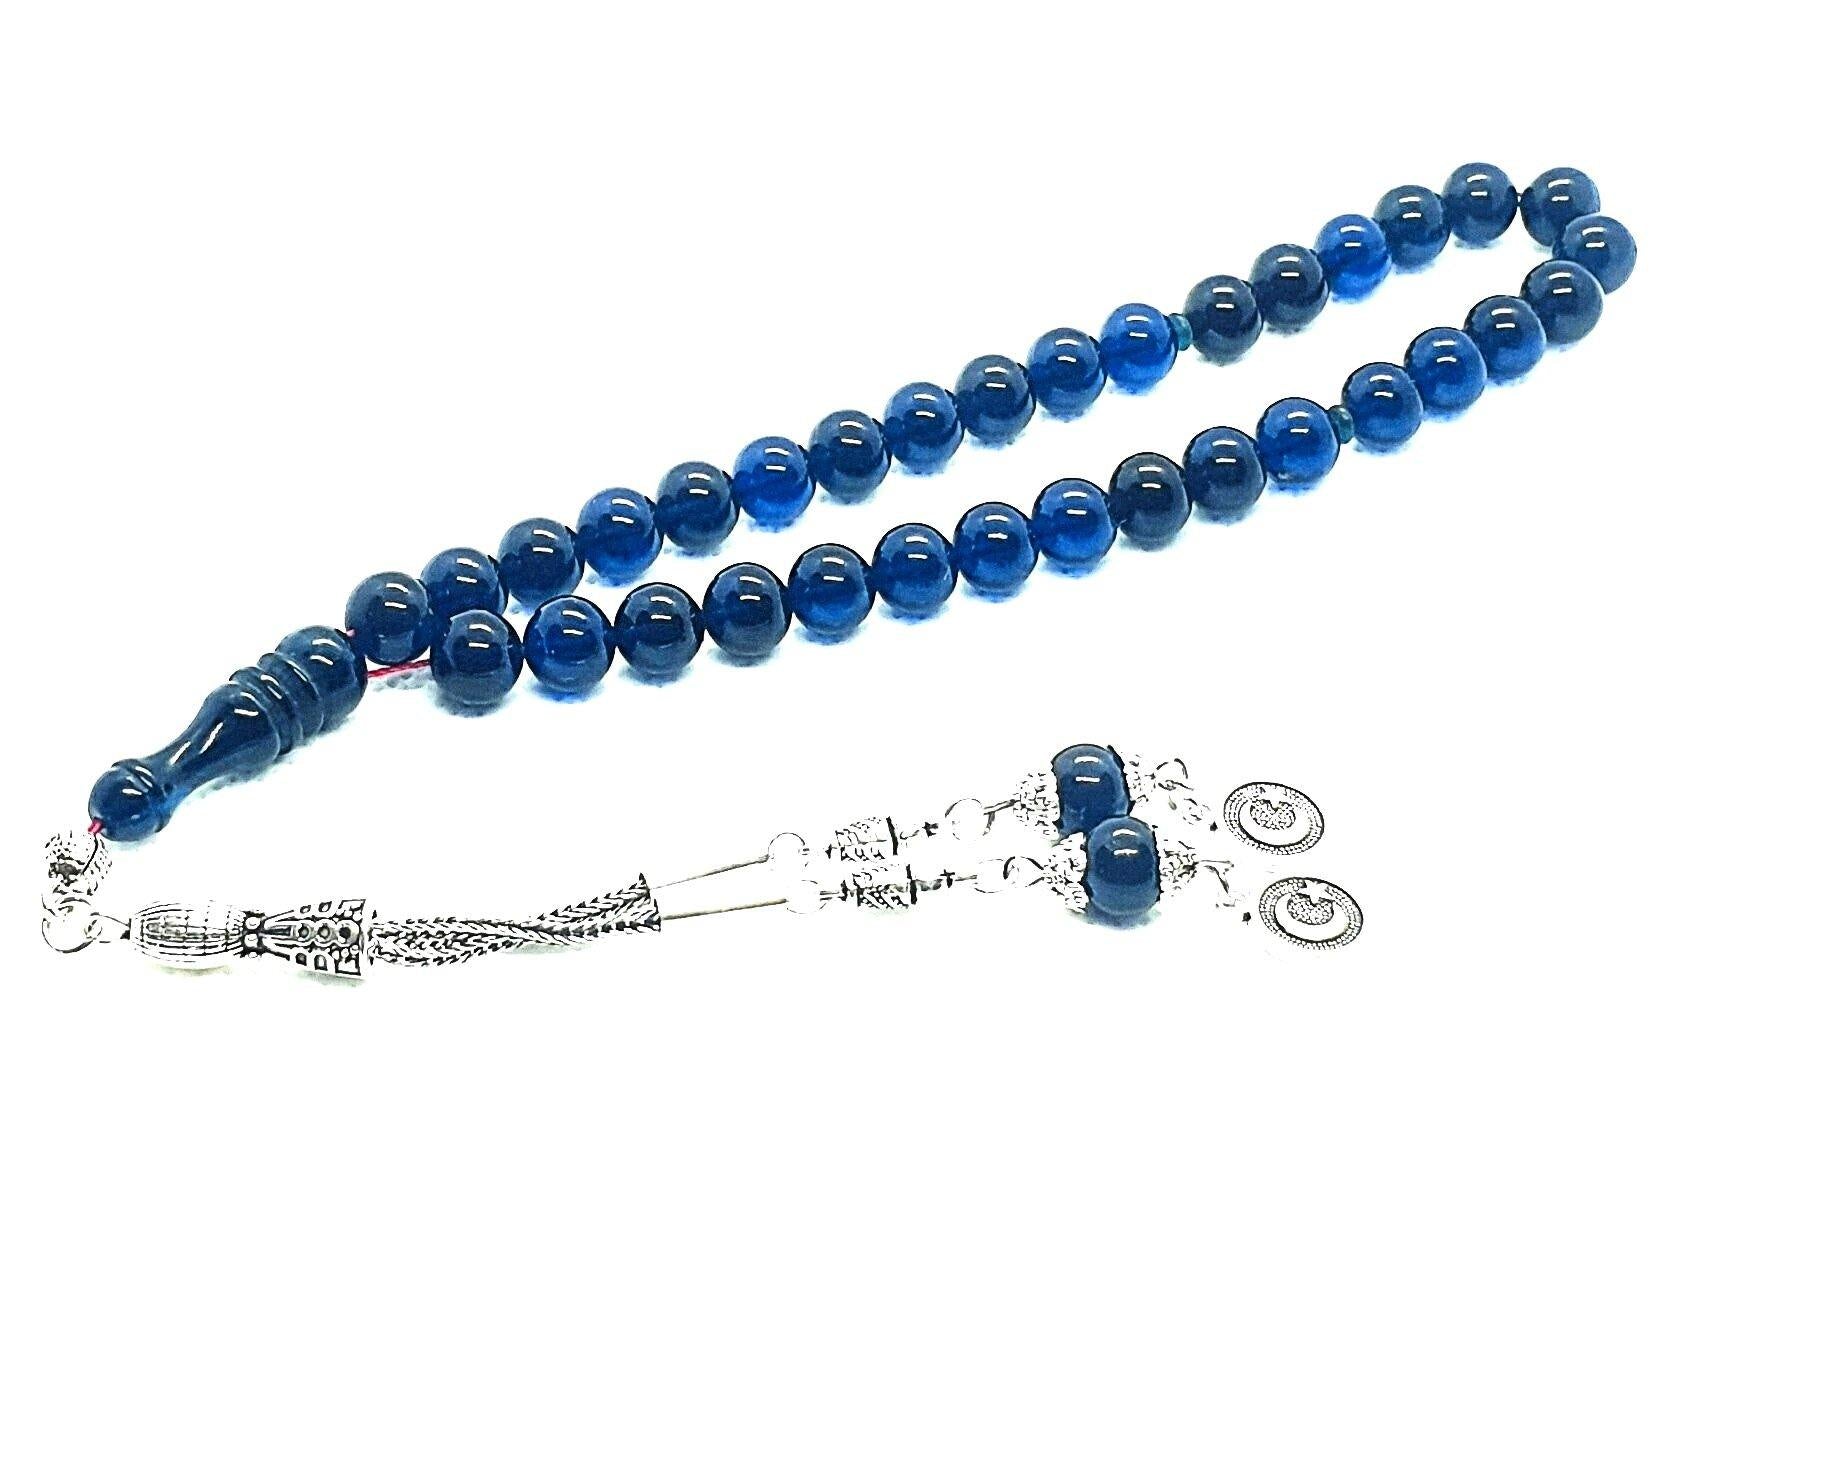 Shades of Blue Beads 